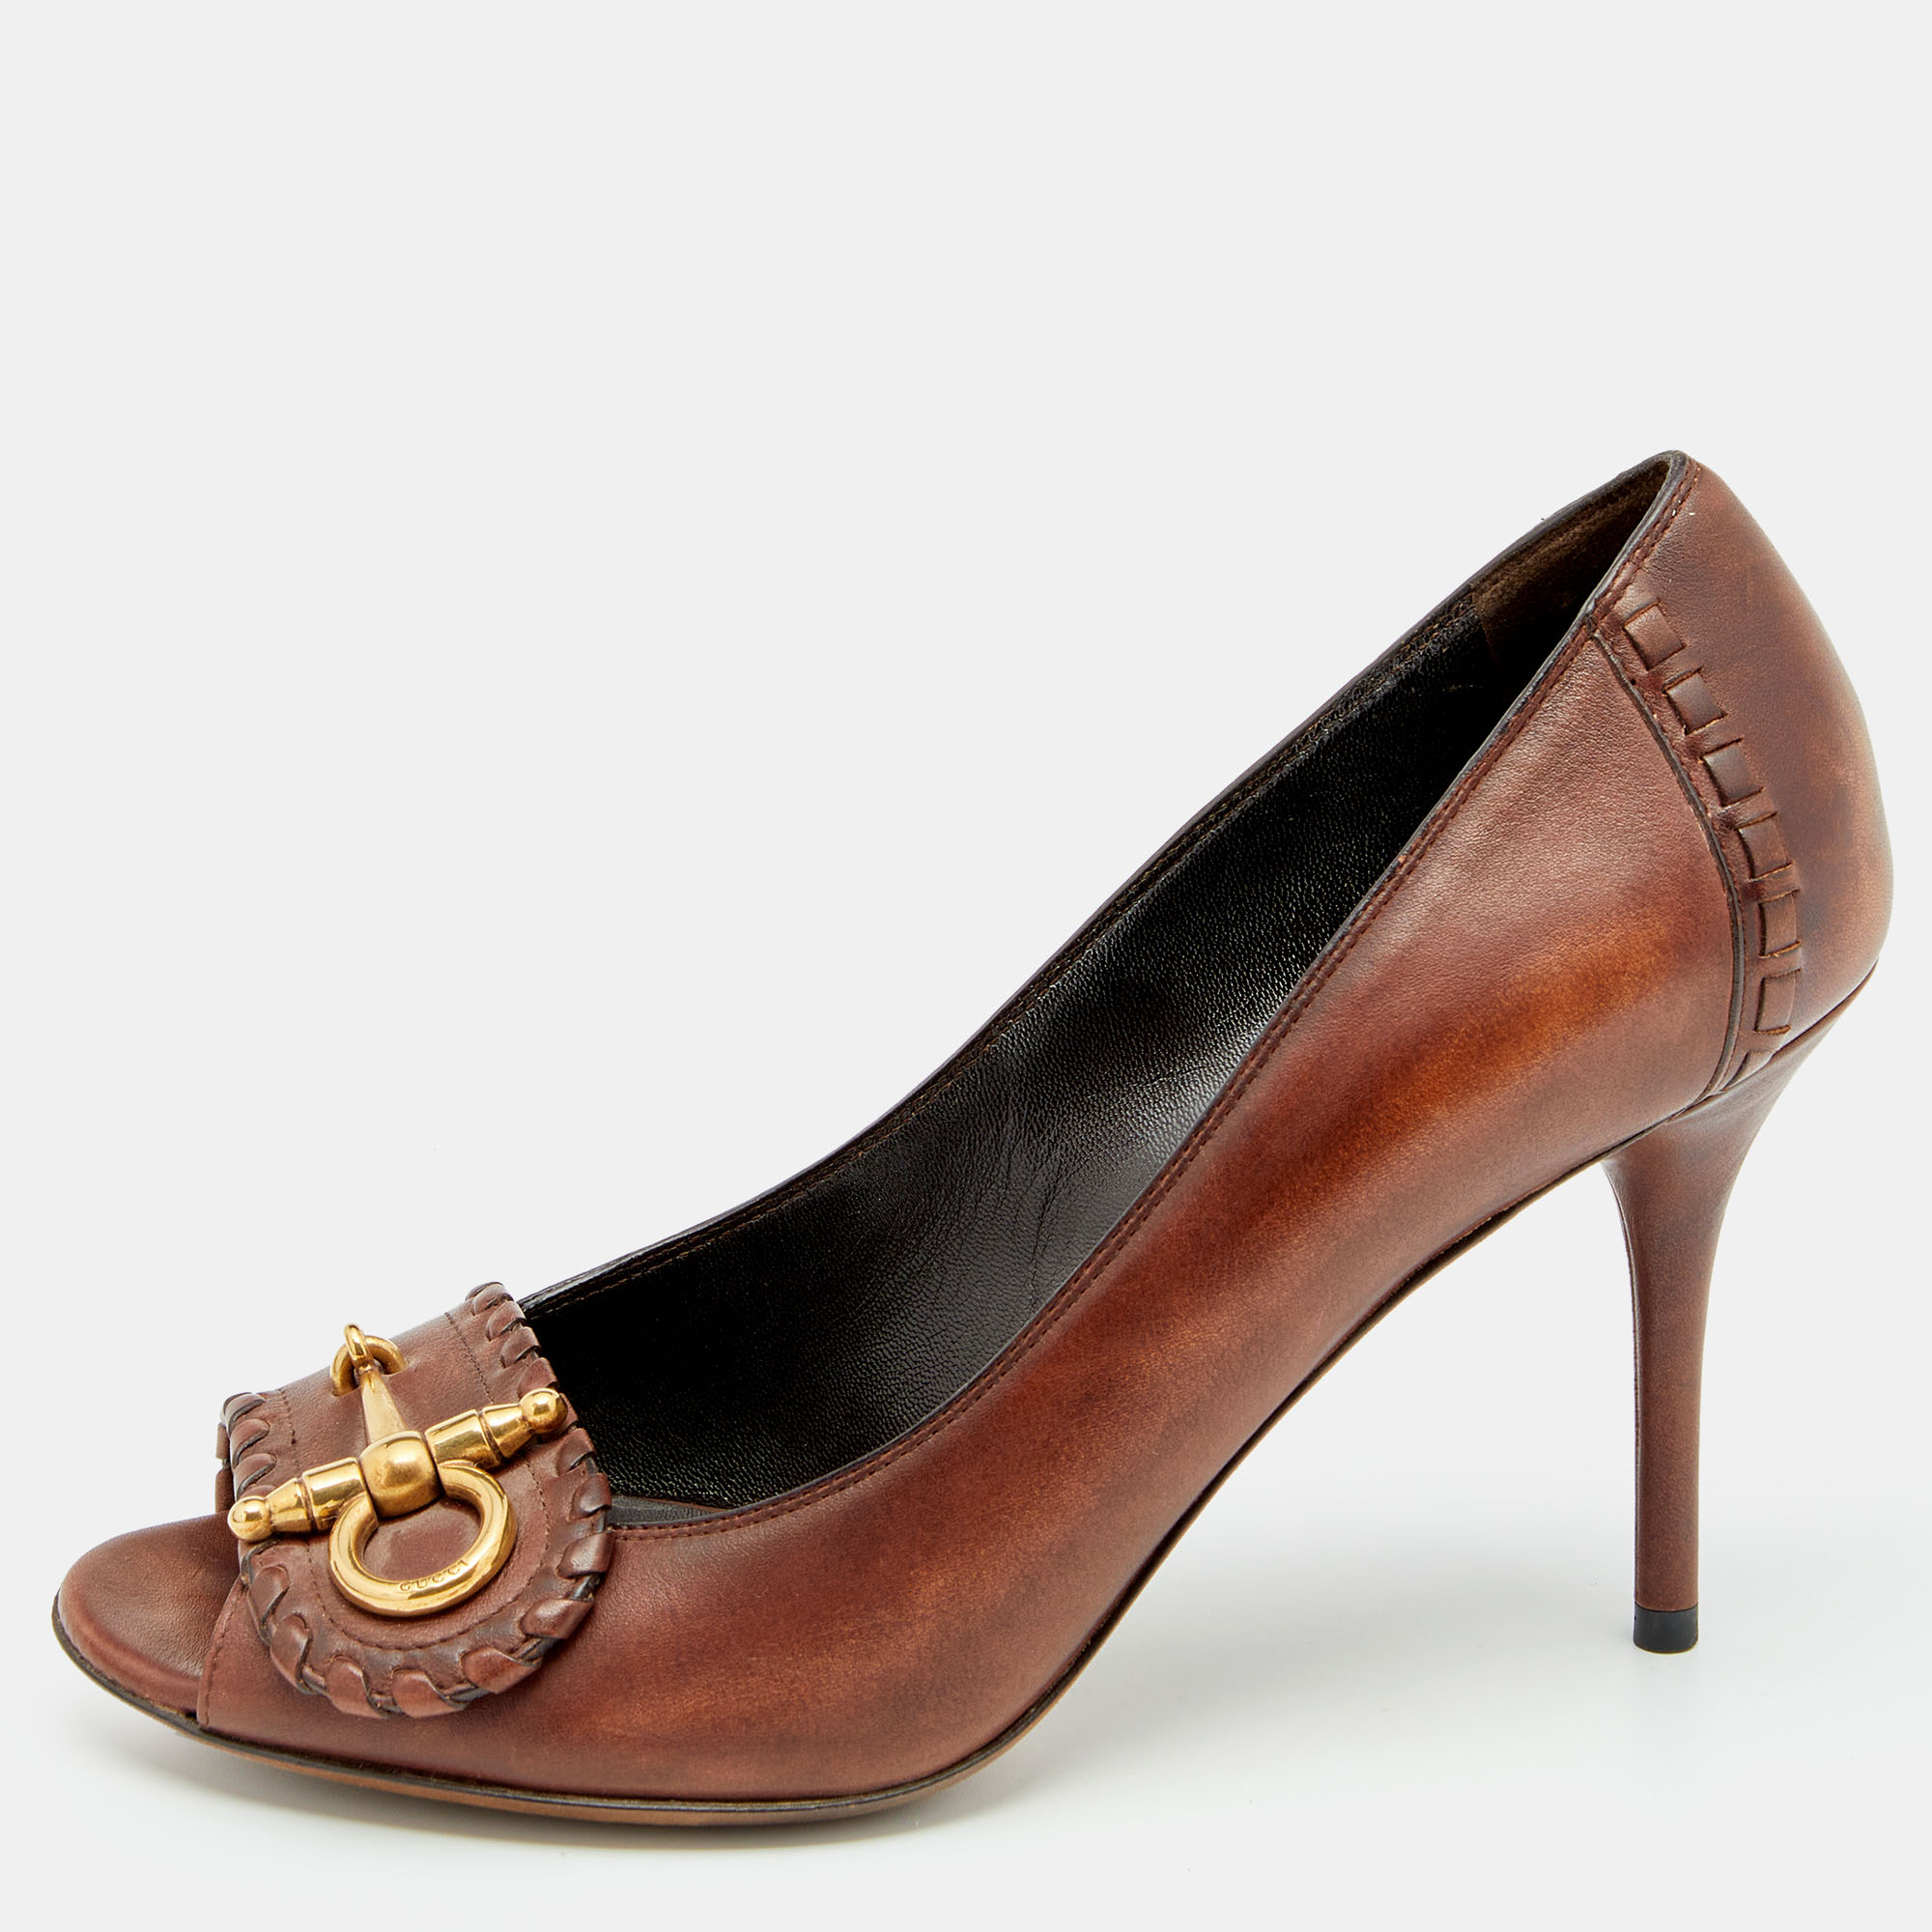 Pre-owned Gucci Brown Leather Horsebit Peep Toe Pumps Size 38